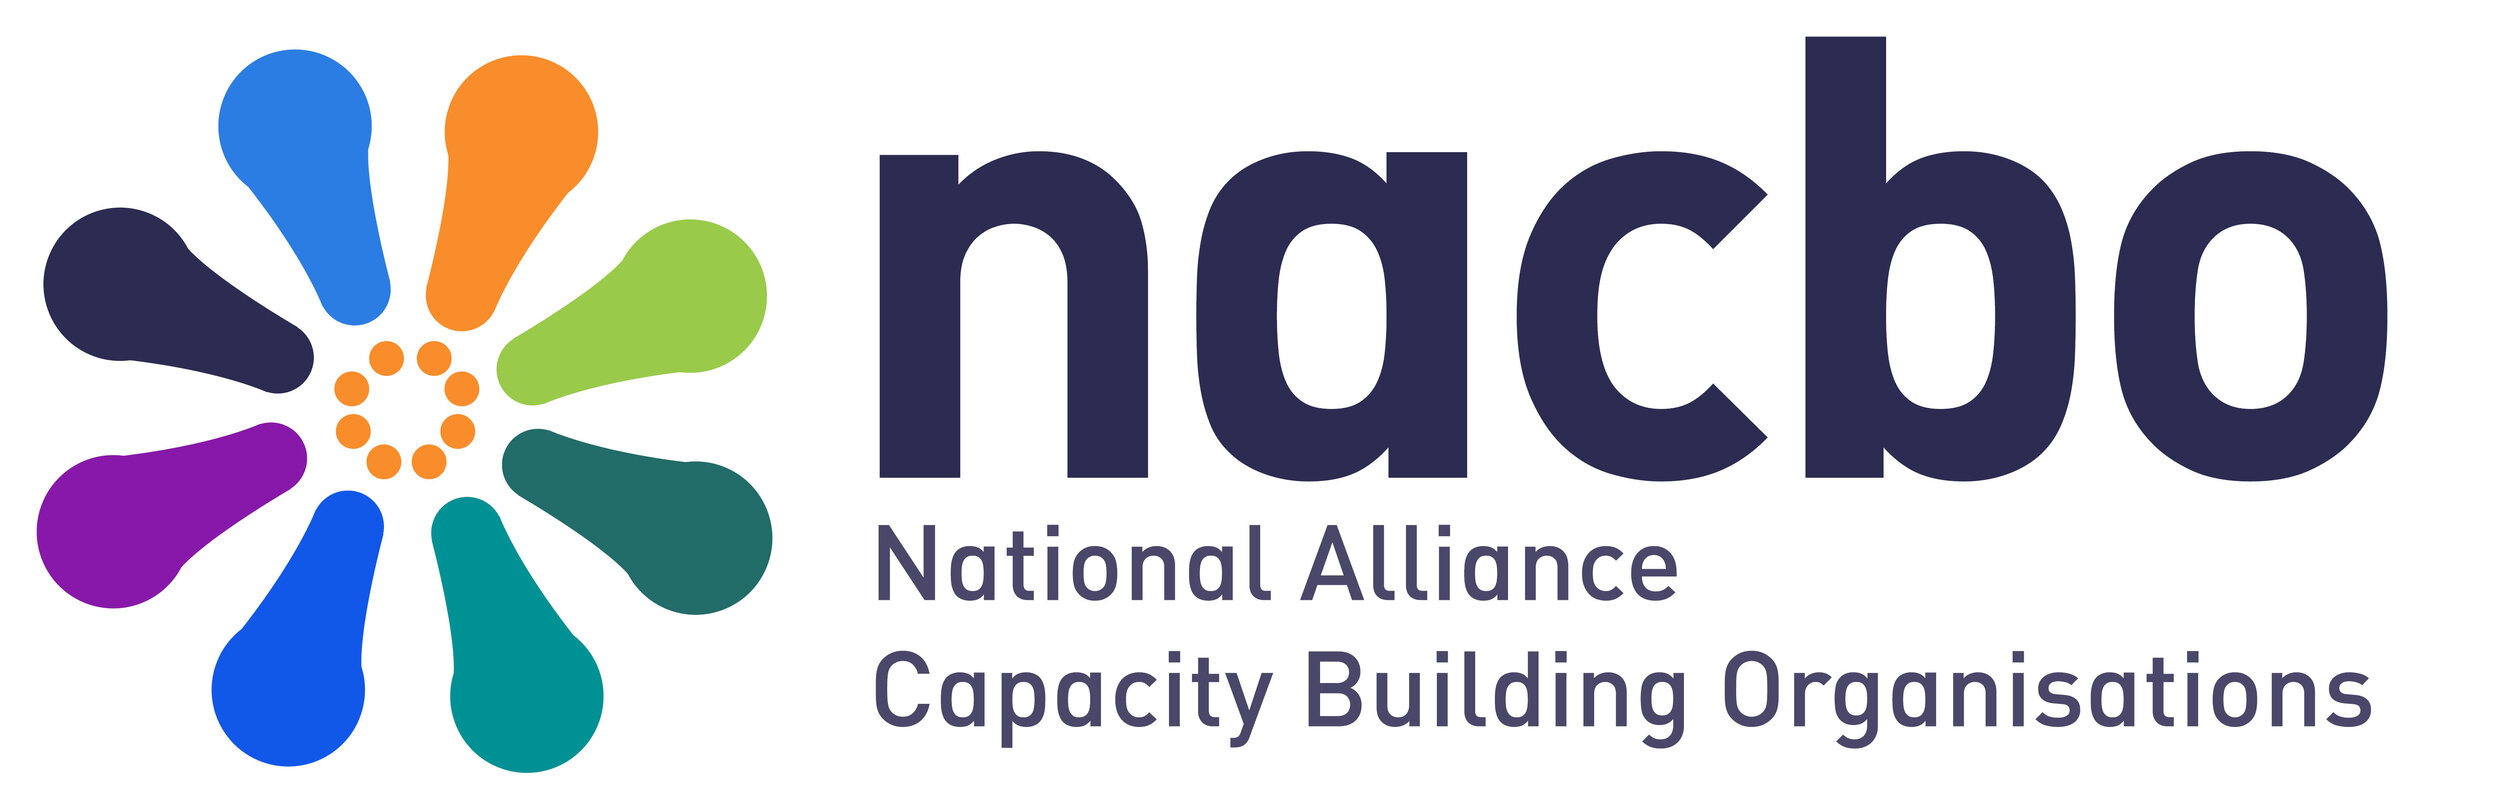 National Alliance of Capacity Building Organisations